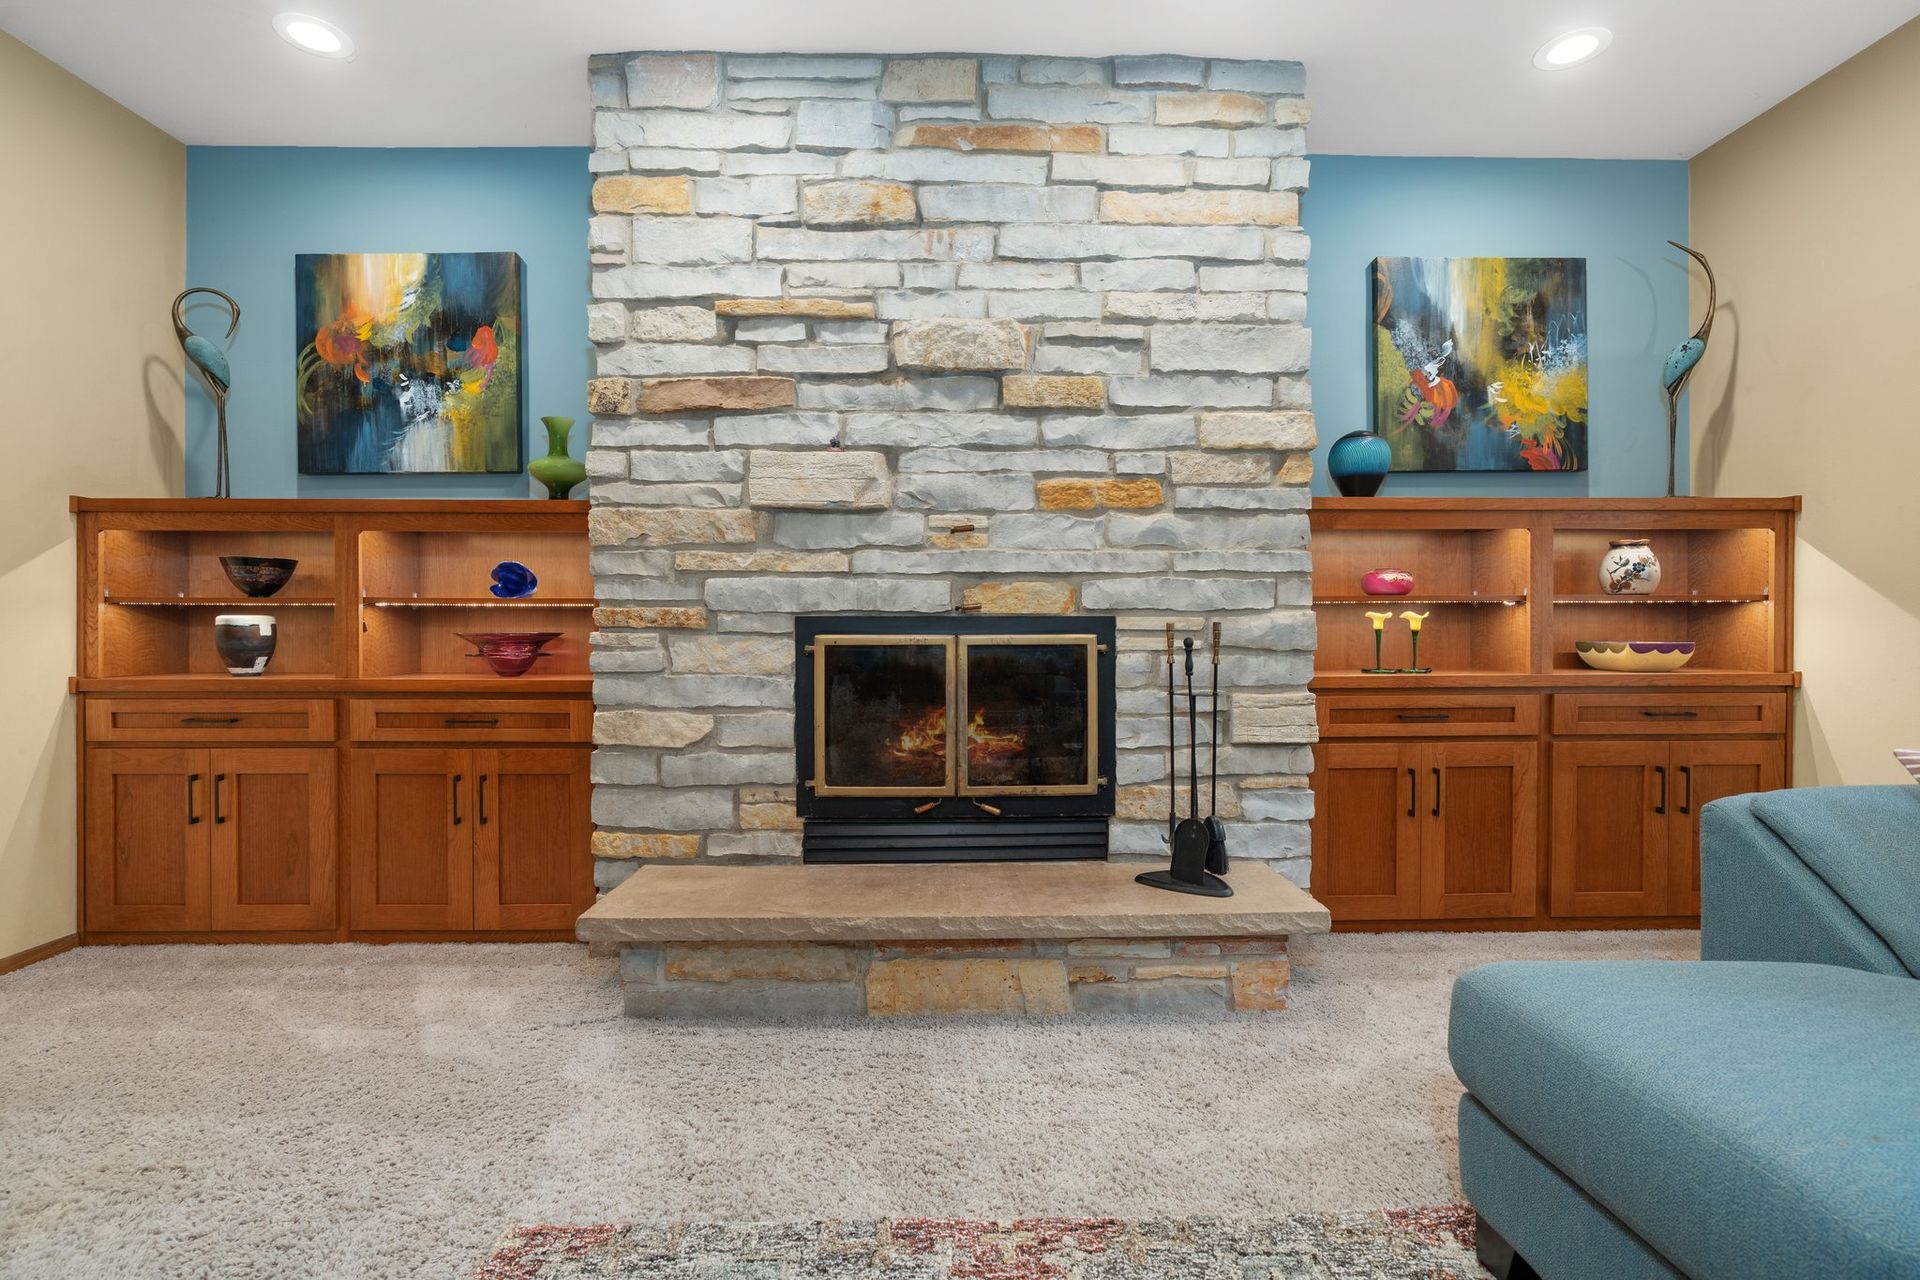 A living room with a stone fireplace and a blue couch